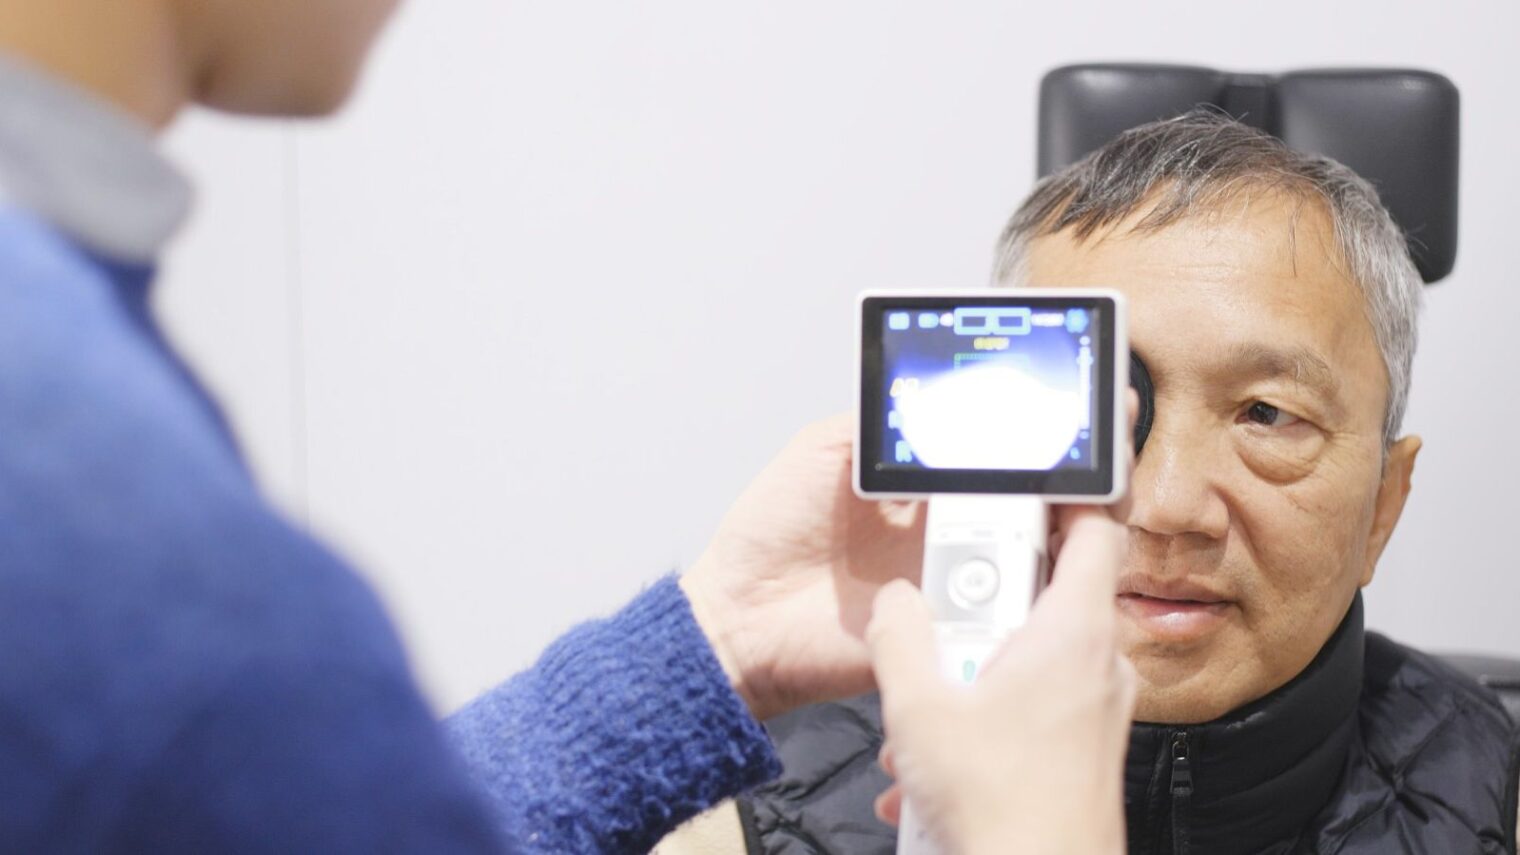 AEYE Health is developing an eye-screening system that can be used by a family doctor. Photo: courtesy